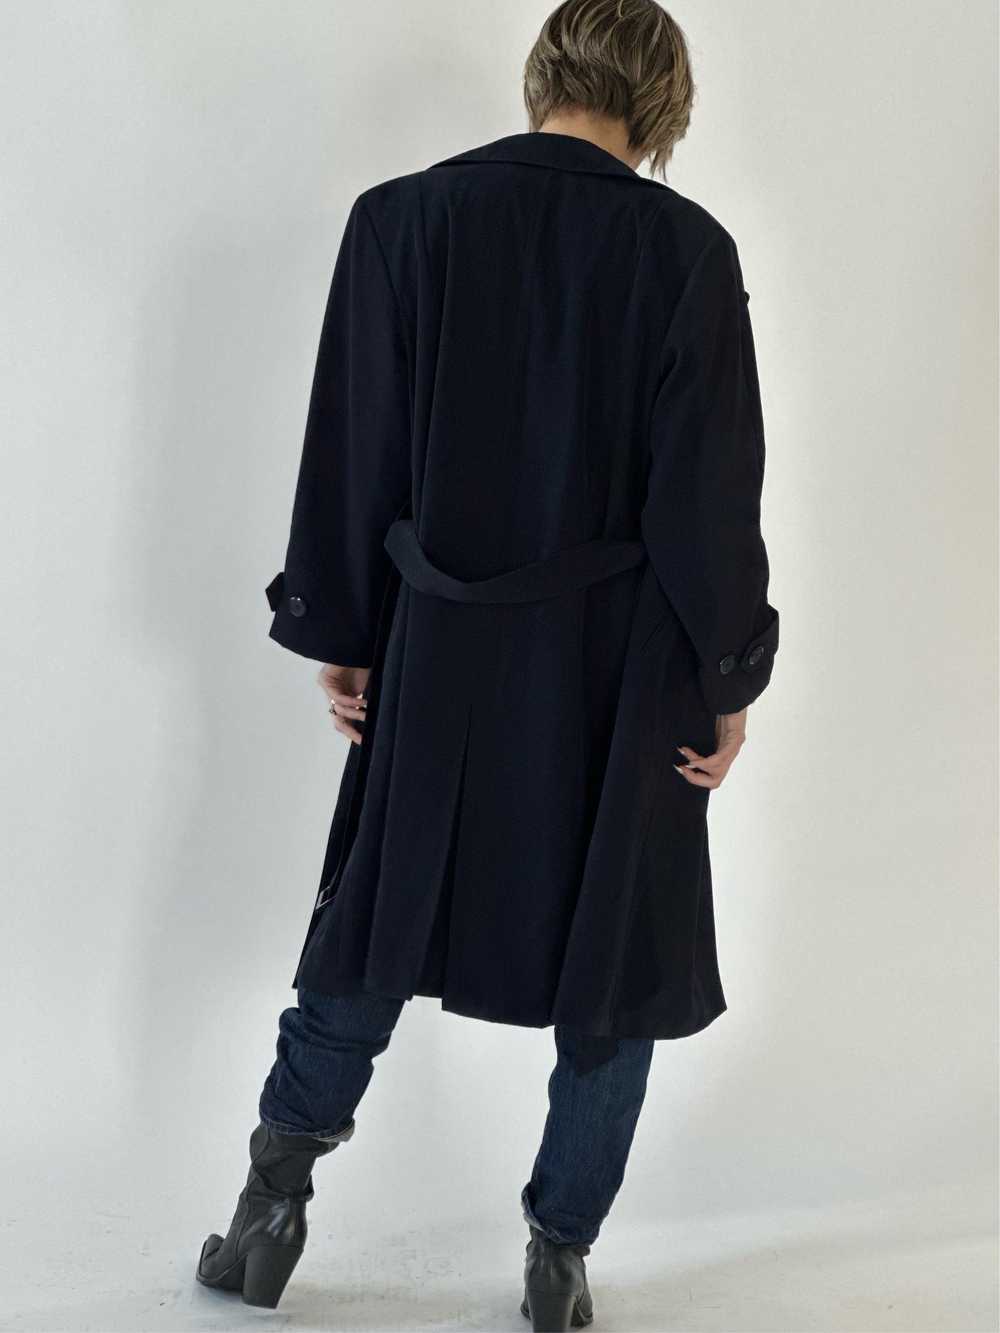 Vintage Navy Petite Trench - image 5